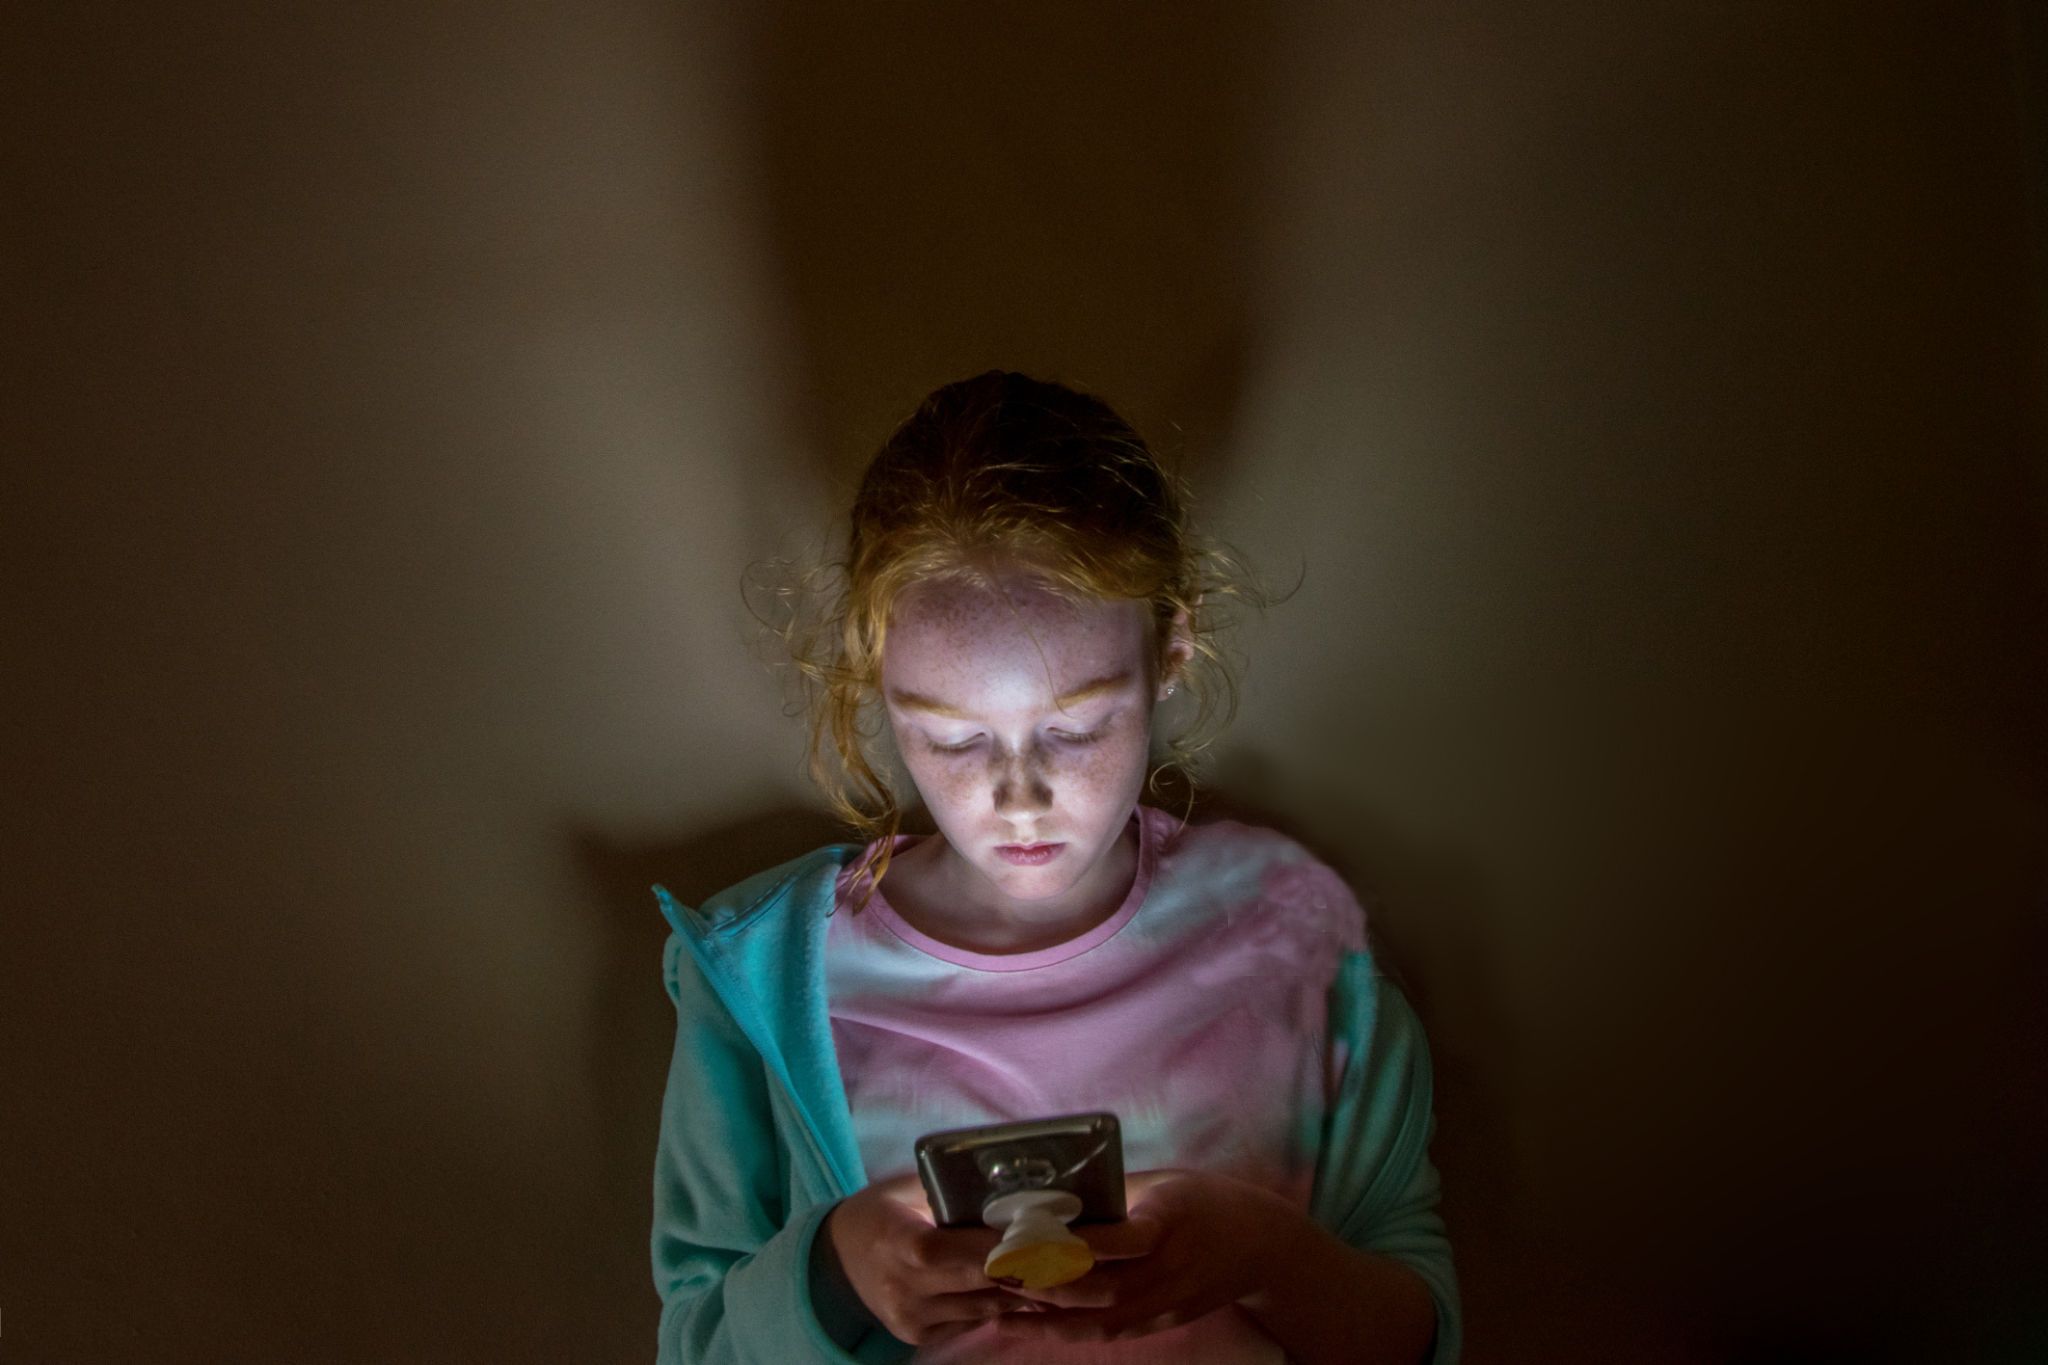 a young long haired redhead girl with face lit up looking into mobile phone screen in a dark room, against a flat wall, with sad facial expression